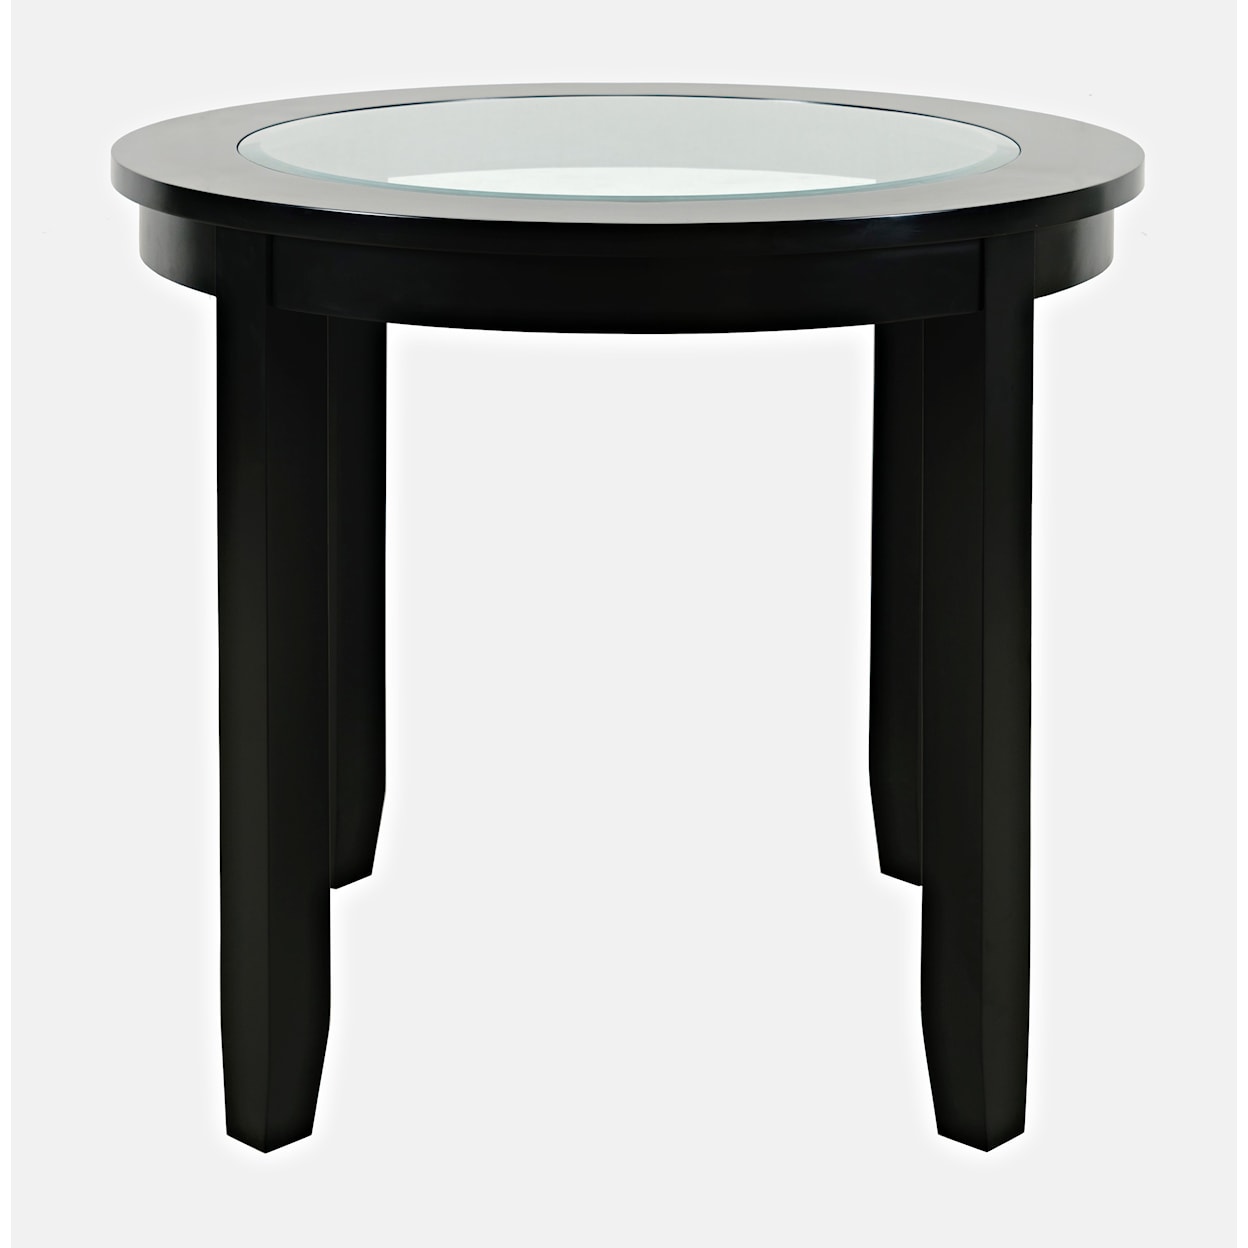 VFM Signature Urban Icon 42" Round Counter Height Dining Table